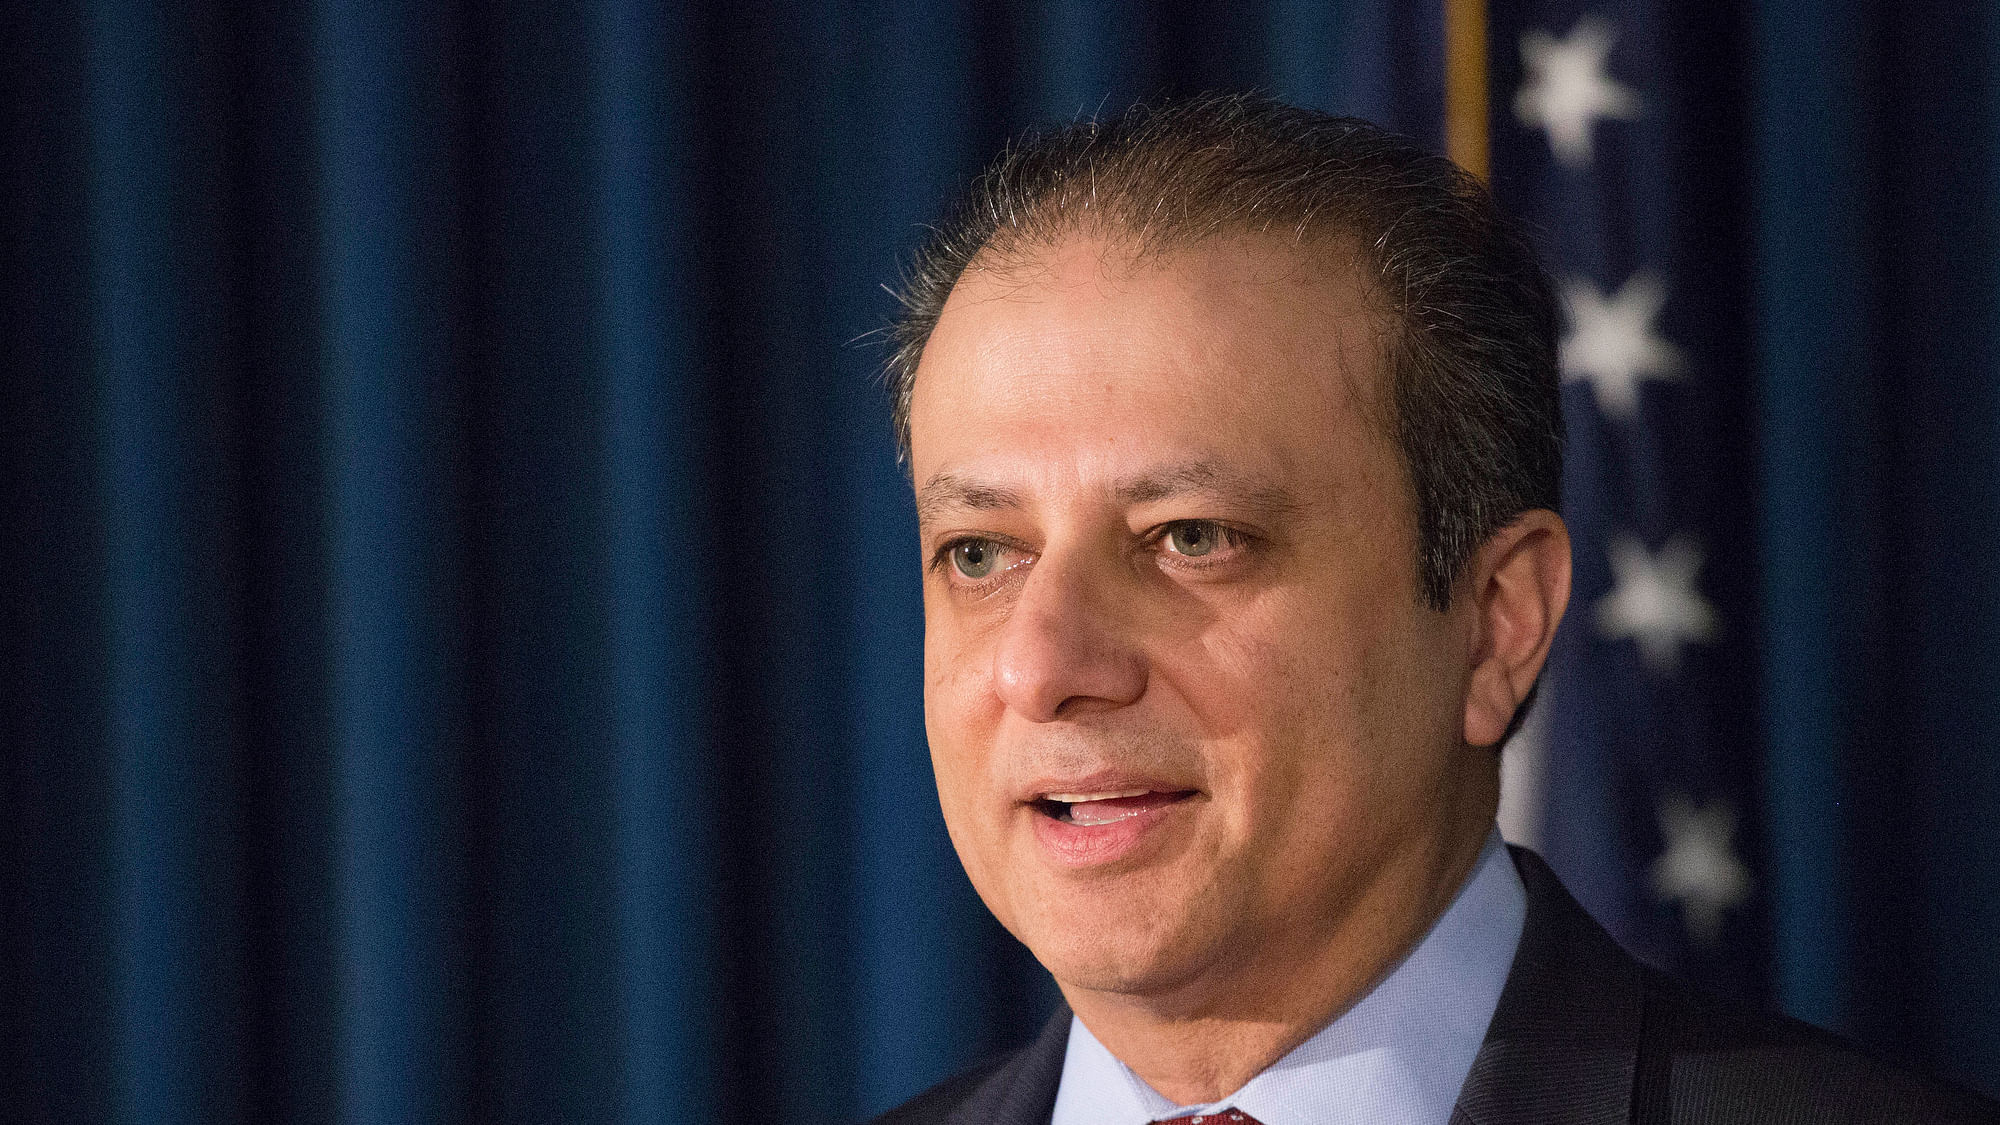 In his first public appearance since being fired, Indian-born former top federal prosecutor Preet Bharara took swipes at President Donald Trump (Photo: AP)